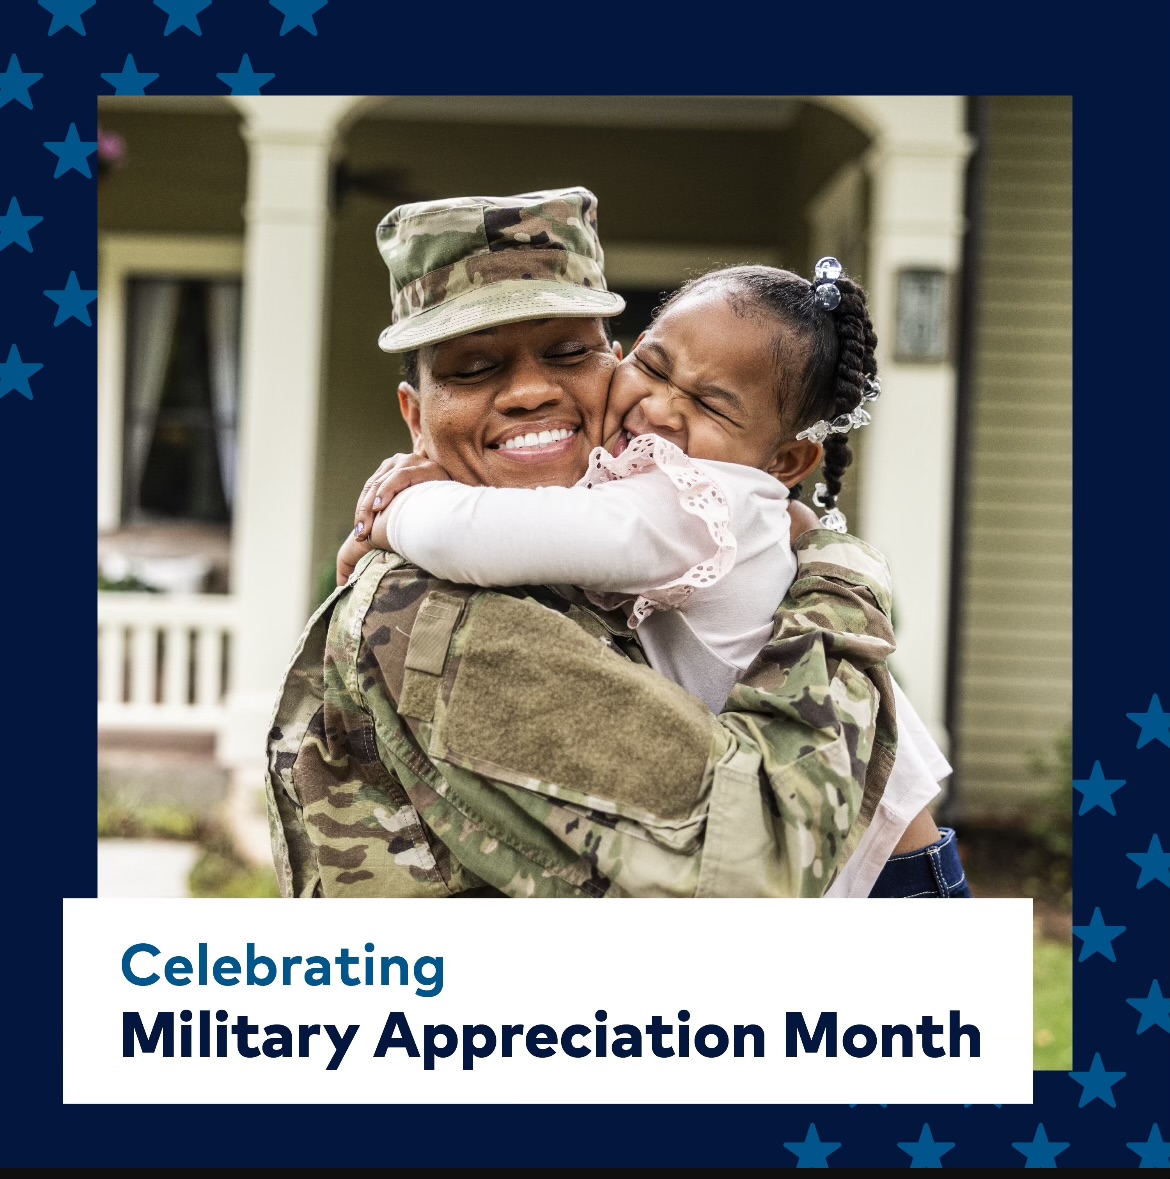 In honor of #MilitaryAppreciationMonth, HCA Midwest Health joins the larger @HCAHealthcare network in sending our deepest gratitude to those who serve our nation with selfless courage and recognizes the unwavering dedication of the families who support them. #HCAVeterans